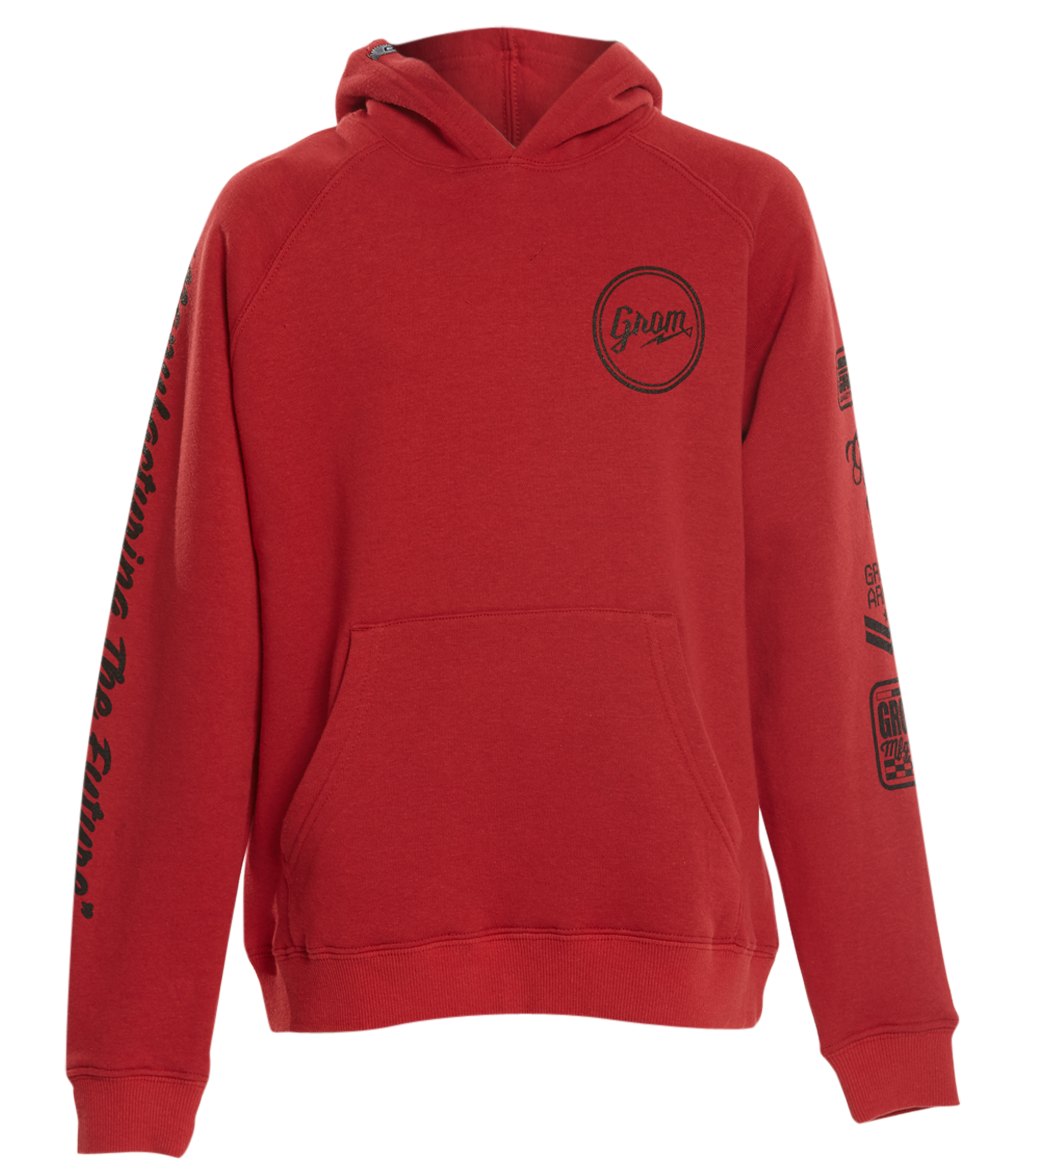 Grom Boys' Circle Script Pull Over Hoodie - Red Xxl 18-20 Cotton/Polyester - Swimoutlet.com